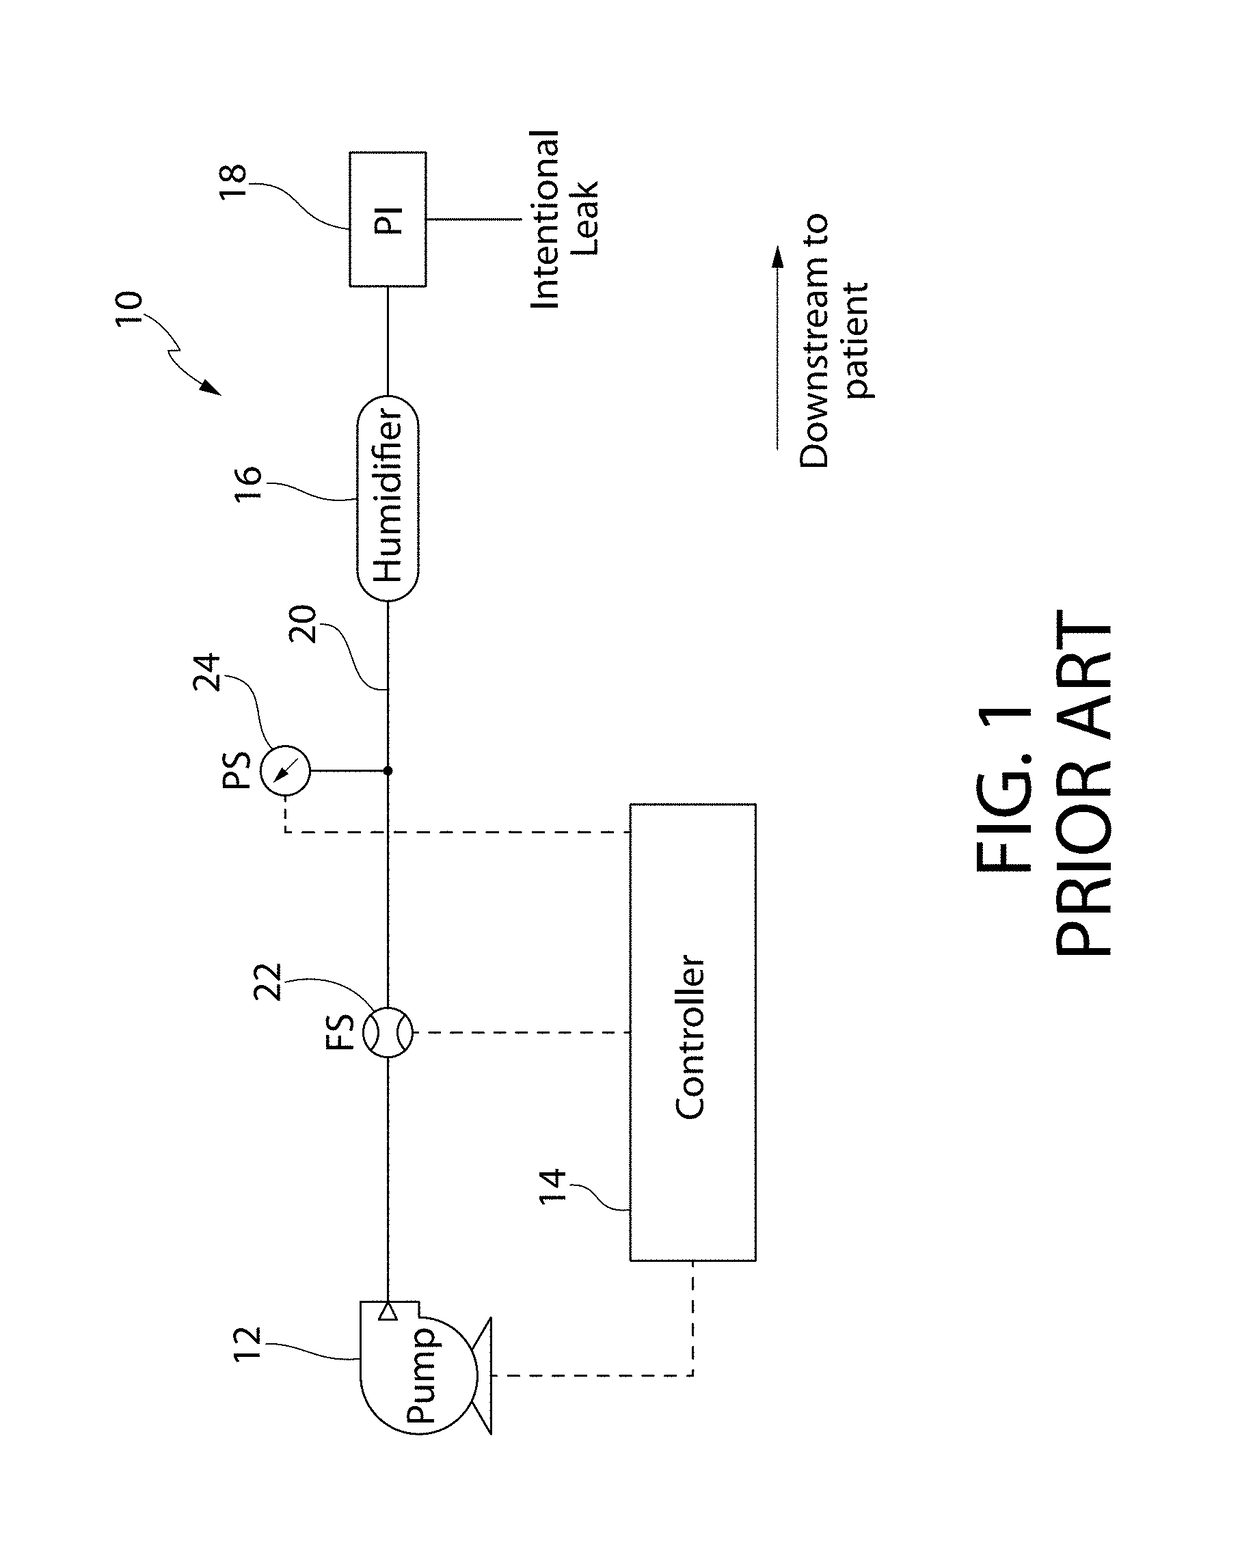 System and Method for Preventing Cross-Contamination in Flow Generation Systems